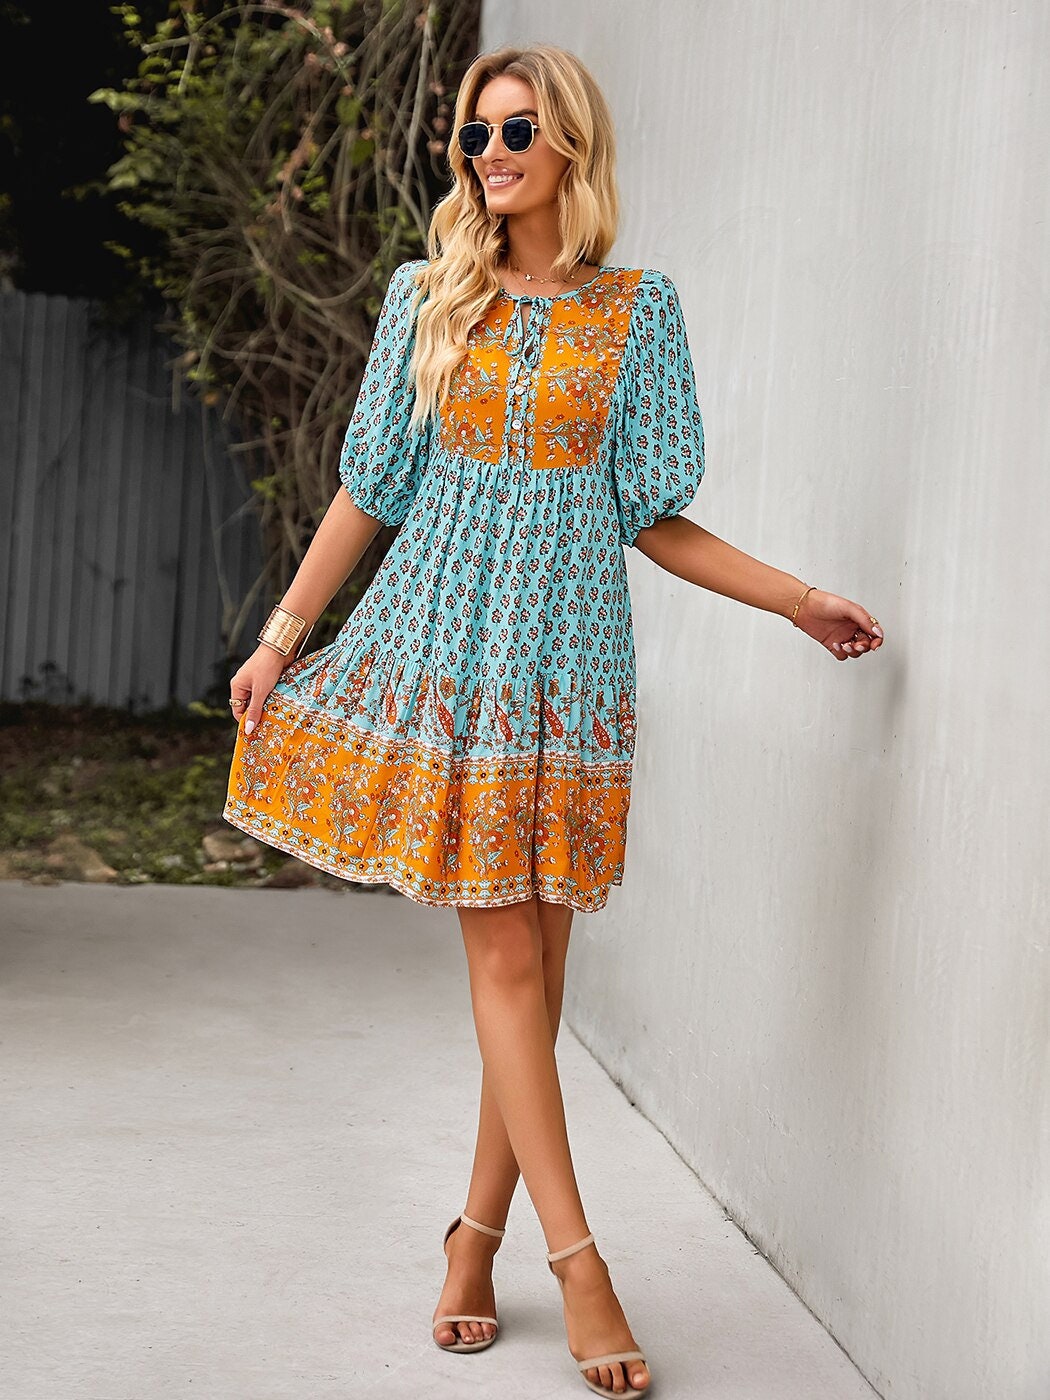 Bohemian Mini Dress with Floral Print and Tassel Front Tie